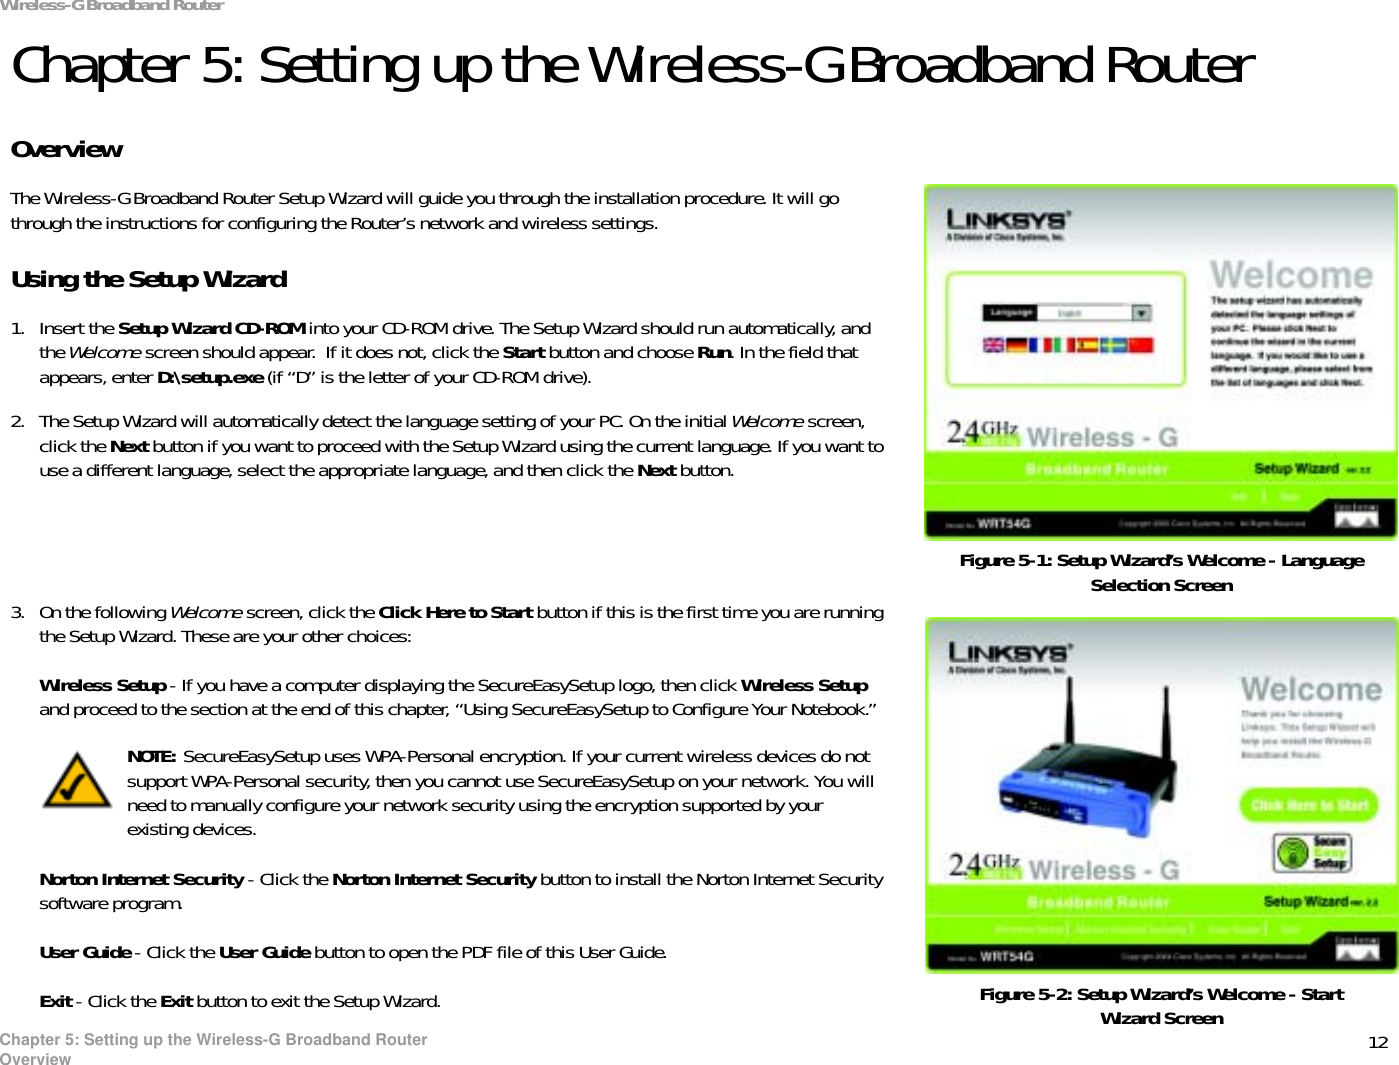 12Chapter 5: Setting up the Wireless-G Broadband RouterOverviewWireless-G Broadband RouterChapter 5: Setting up the Wireless-G Broadband RouterOverviewThe Wireless-G Broadband Router Setup Wizard will guide you through the installation procedure. It will go through the instructions for configuring the Router’s network and wireless settings.Using the Setup Wizard1. Insert the Setup Wizard CD-ROM into your CD-ROM drive. The Setup Wizard should run automatically, and the Welcome screen should appear.  If it does not, click the Start button and choose Run. In the field that appears, enter D:\setup.exe (if “D” is the letter of your CD-ROM drive).2. The Setup Wizard will automatically detect the language setting of your PC. On the initial Welcome screen, click the Next button if you want to proceed with the Setup Wizard using the current language. If you want to use a different language, select the appropriate language, and then click the Next button.3. On the following Welcome screen, click the Click Here to Start button if this is the first time you are running the Setup Wizard. These are your other choices:Wireless Setup - If you have a computer displaying the SecureEasySetup logo, then click Wireless Setupand proceed to the section at the end of this chapter, “Using SecureEasySetup to Configure Your Notebook.”Norton Internet Security - Click the Norton Internet Security button to install the Norton Internet Security software program. User Guide - Click the User Guide button to open the PDF file of this User Guide.Exit - Click the Exit button to exit the Setup Wizard.Figure 5-1: Setup Wizard’s Welcome - Language Selection ScreenFigure 5-2: Setup Wizard’s Welcome - Start Wizard ScreenNOTE: SecureEasySetup uses WPA-Personal encryption. If your current wireless devices do not support WPA-Personal security, then you cannot use SecureEasySetup on your network. You will need to manually configure your network security using the encryption supported by your existing devices.